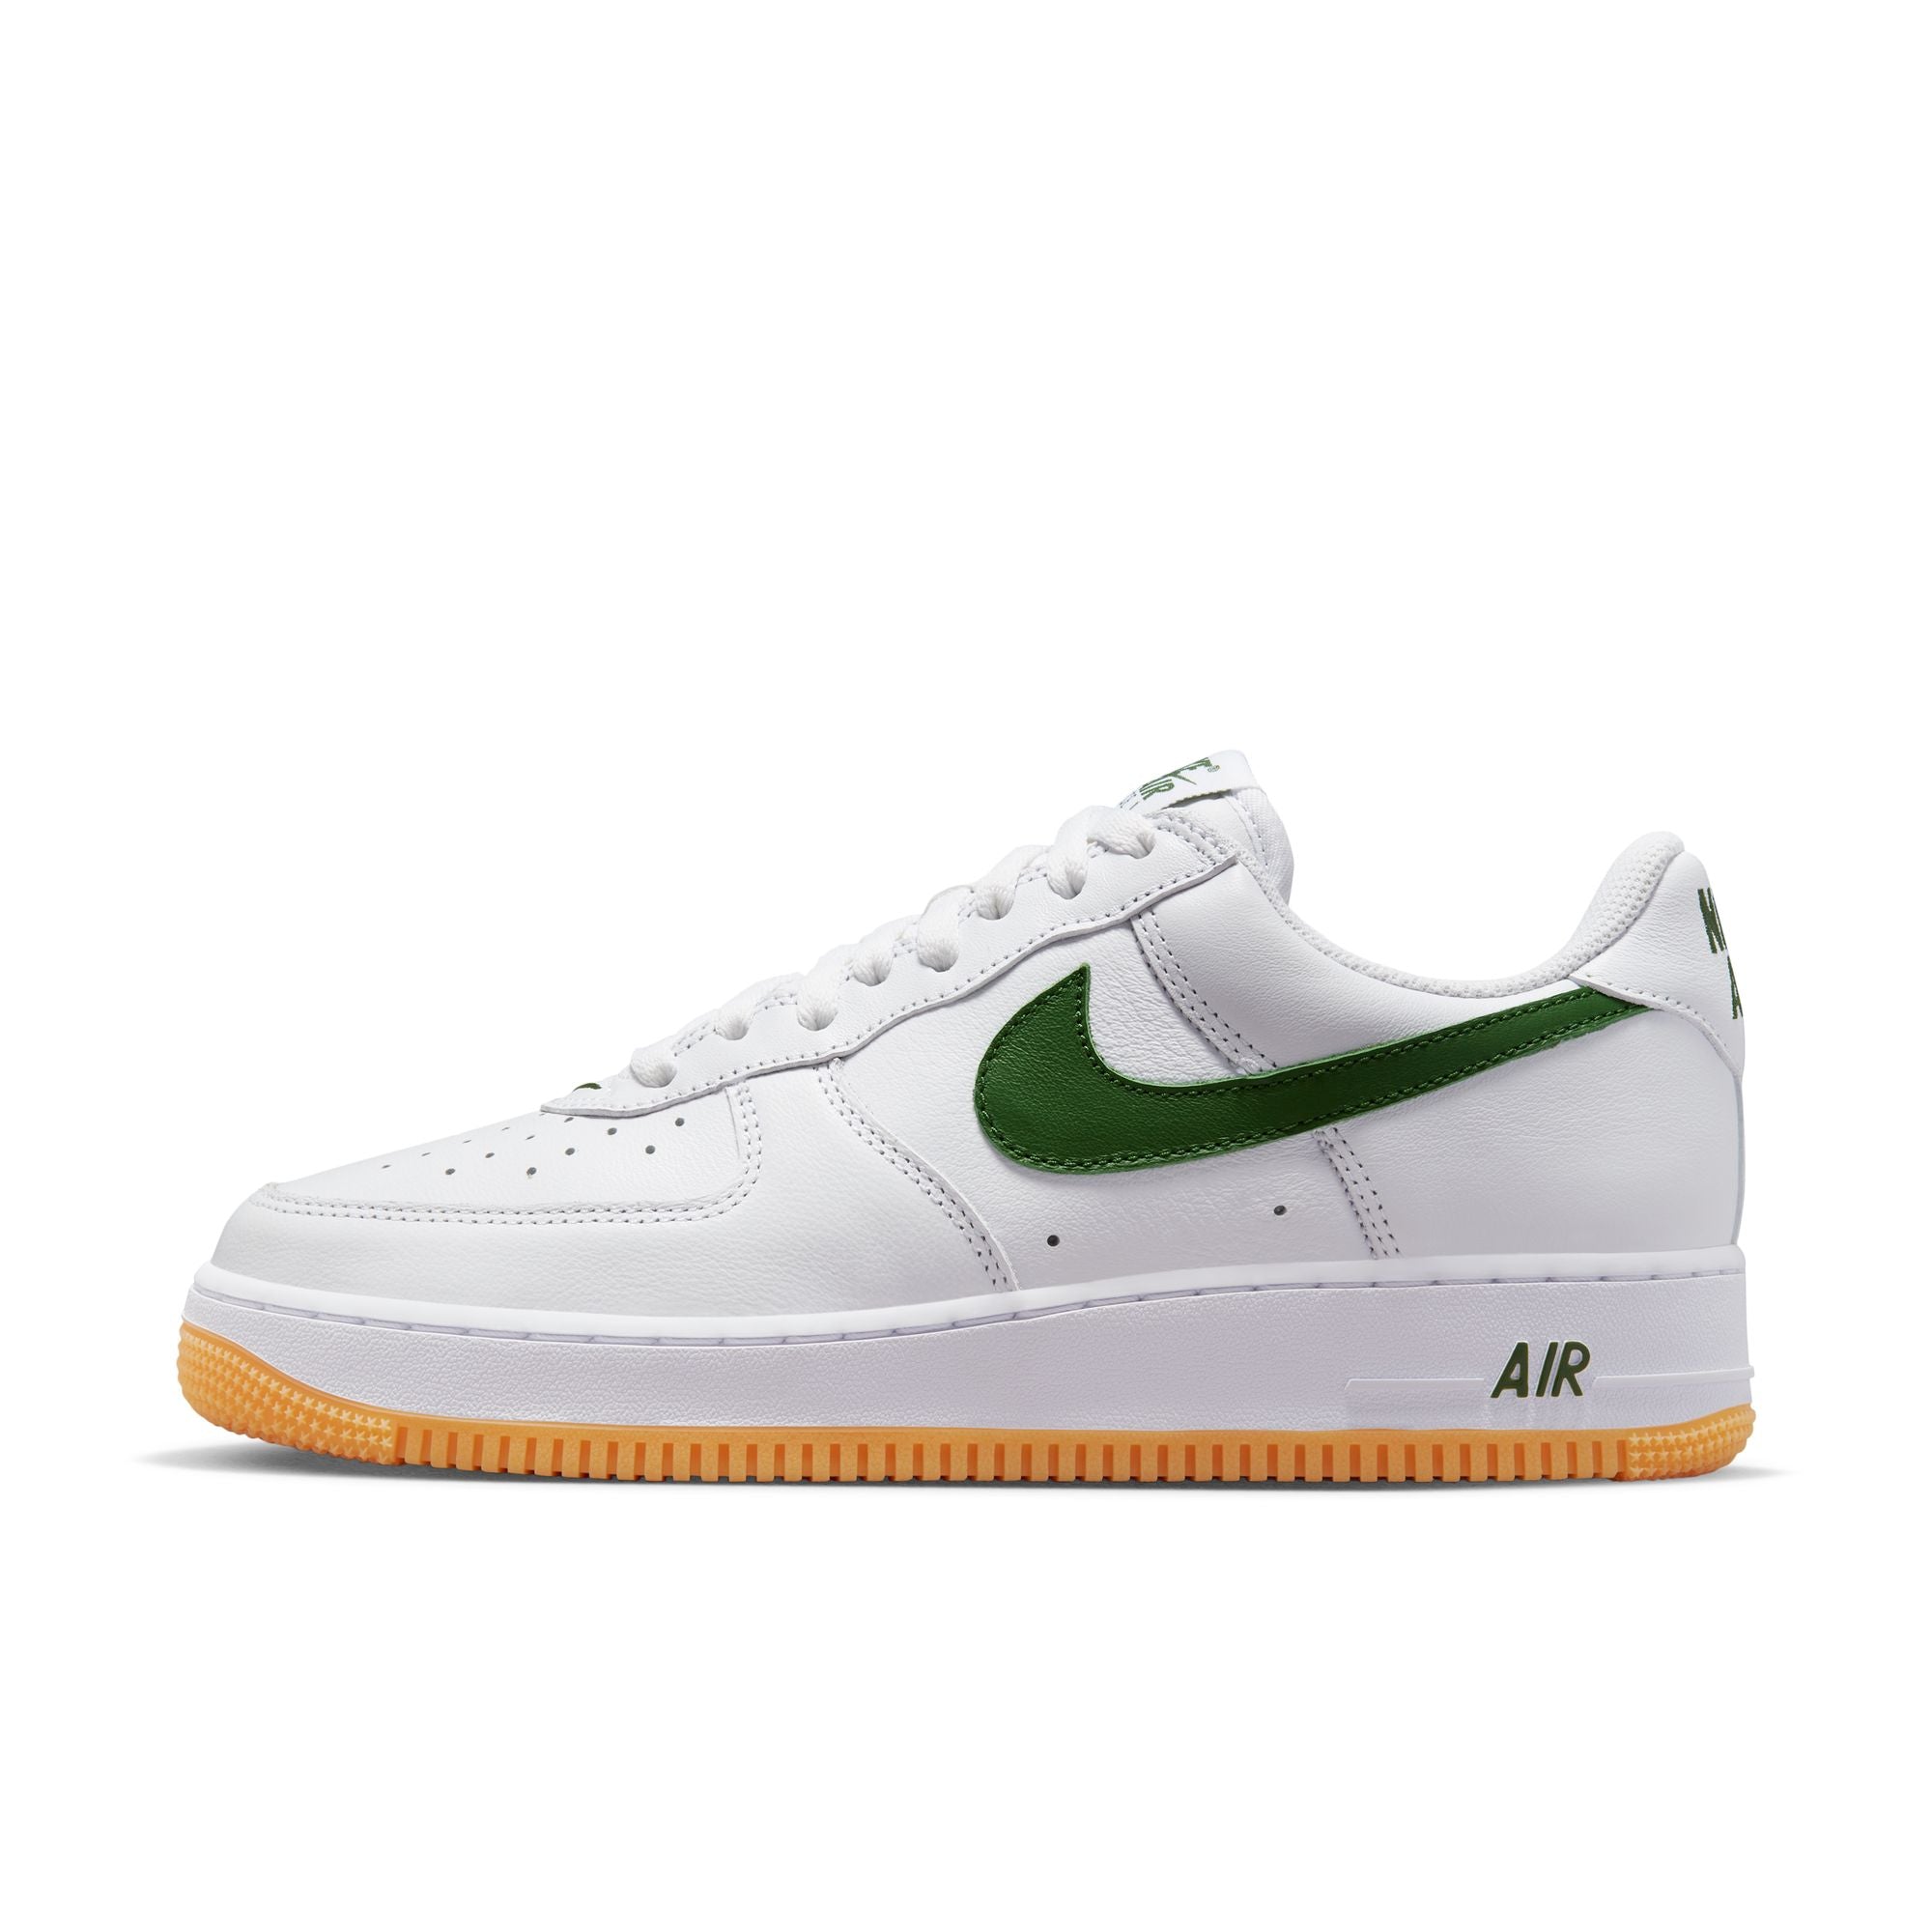 AIR FORCE 1 LOW RETRO - WHITE/FOREST GREEN/GUM YELLOW